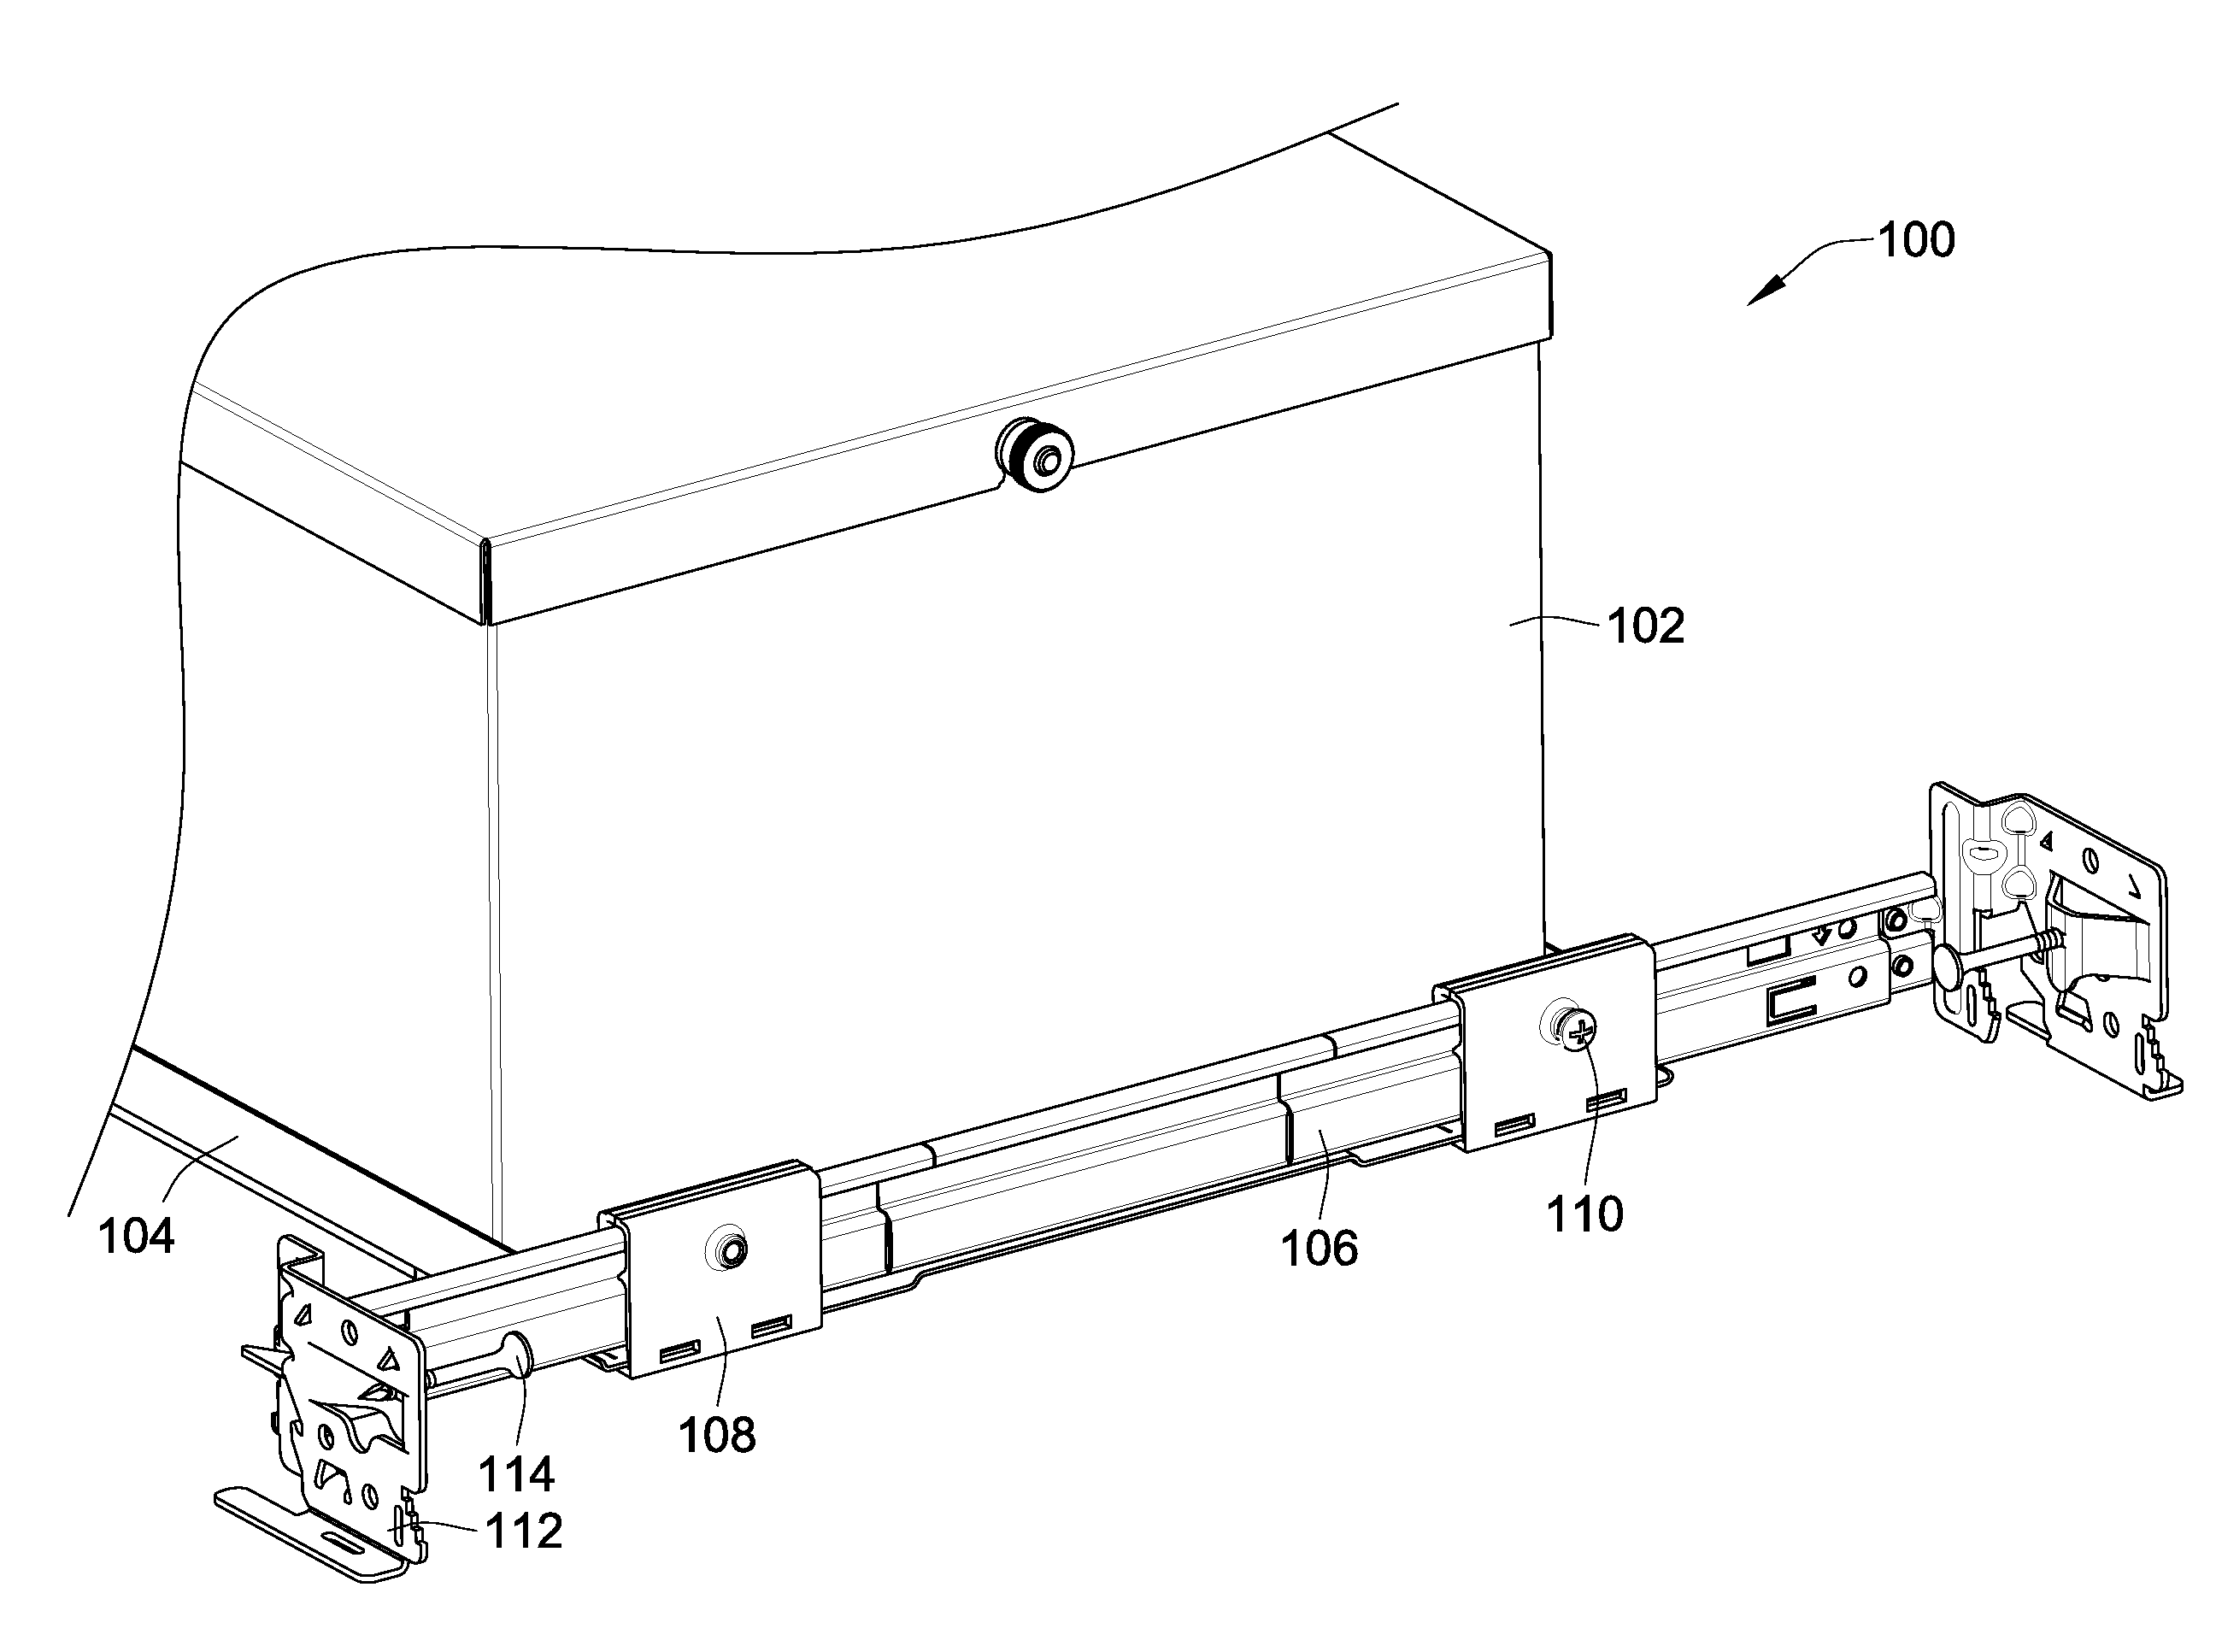 Telescoping mounting system for a recessed luminaire